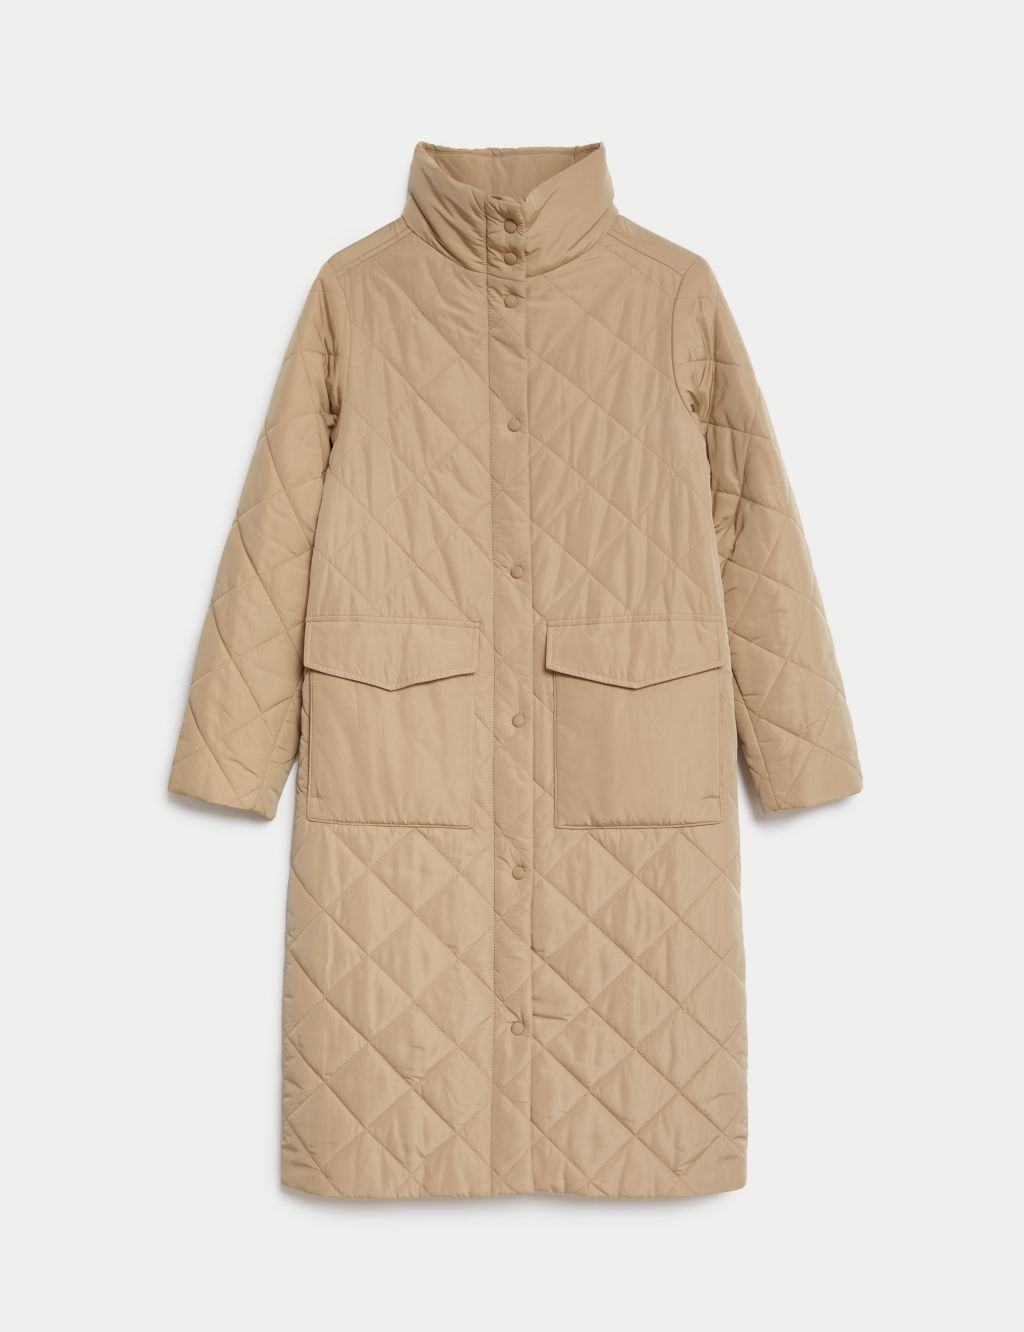 Diamond Quilted Funnel Neck Longline Coat image 2